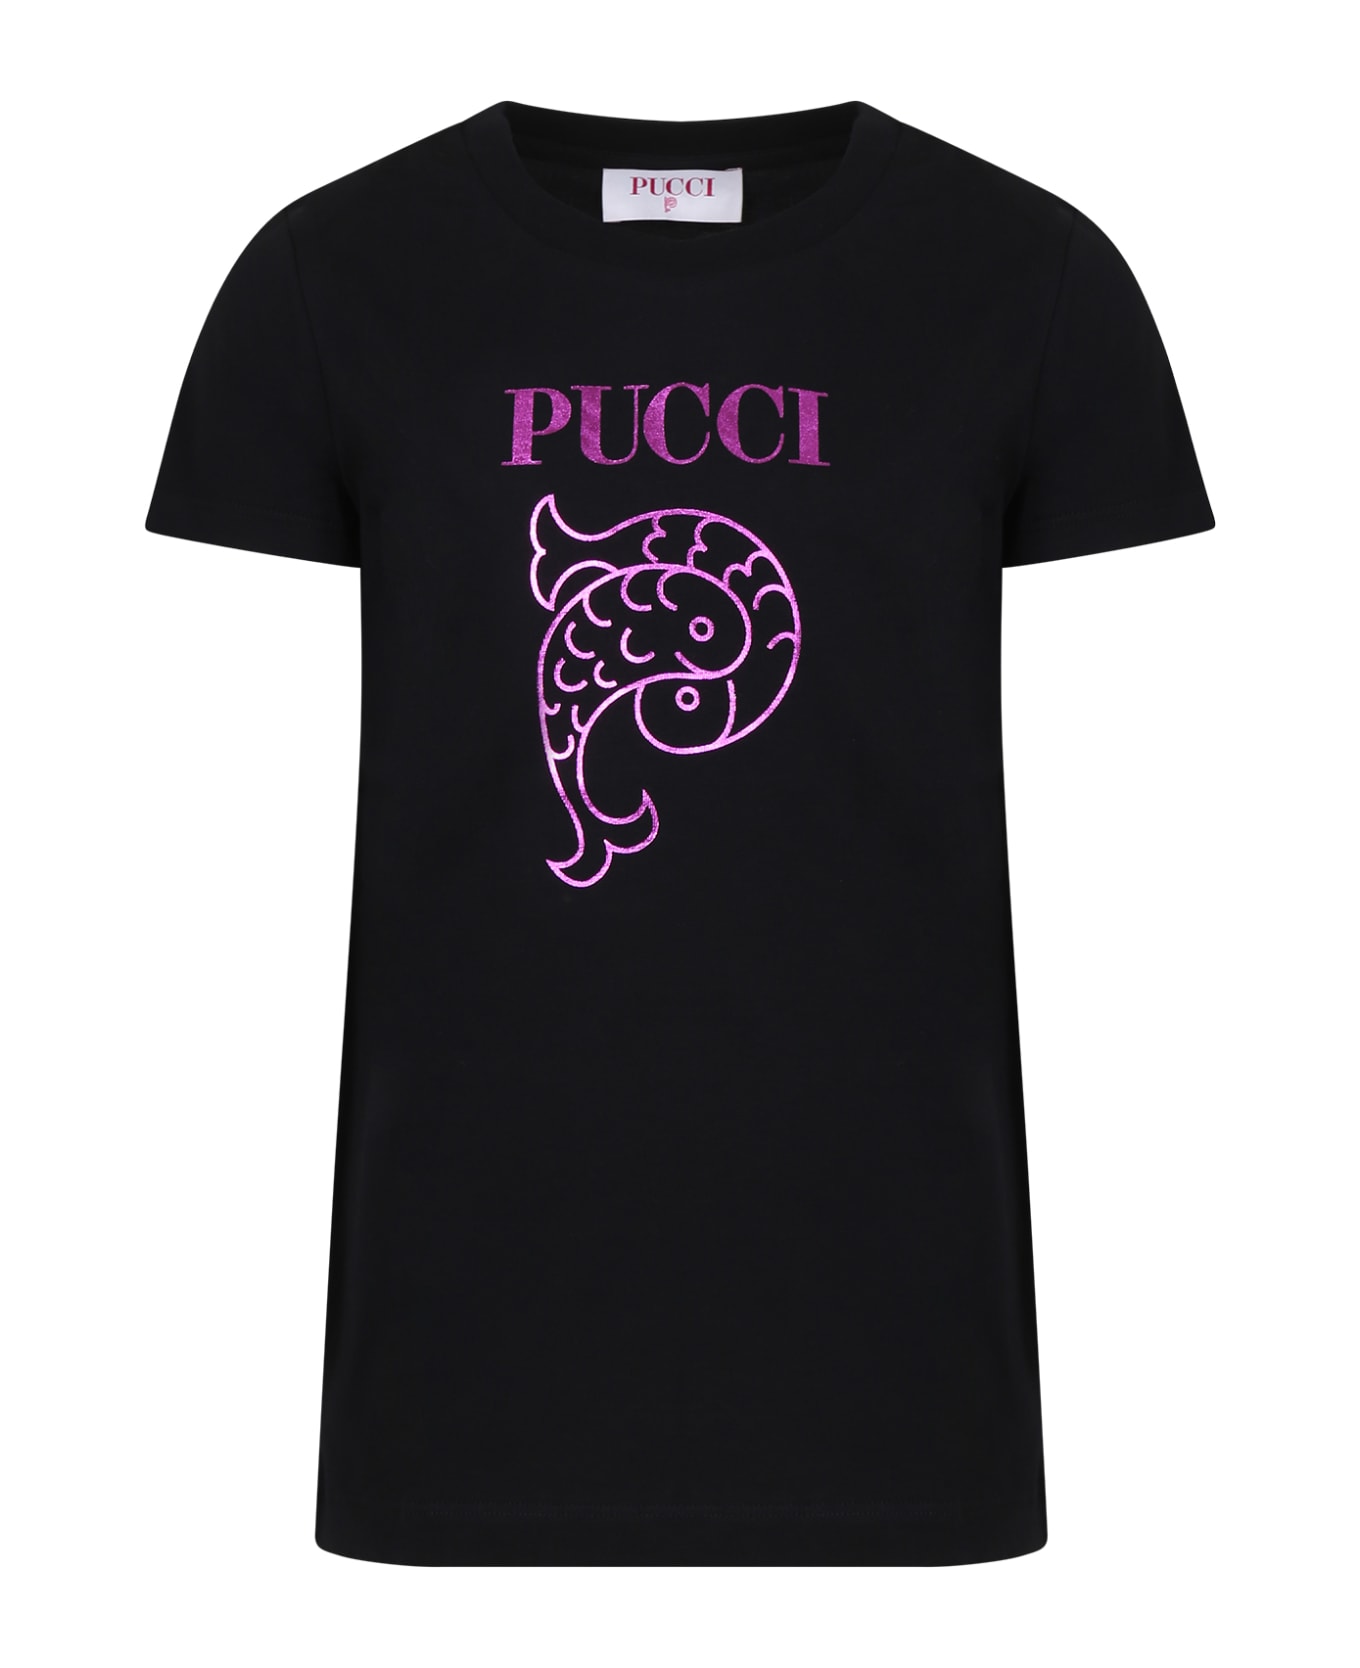 Pucci Black T-shirt For Girl With Logo - Black